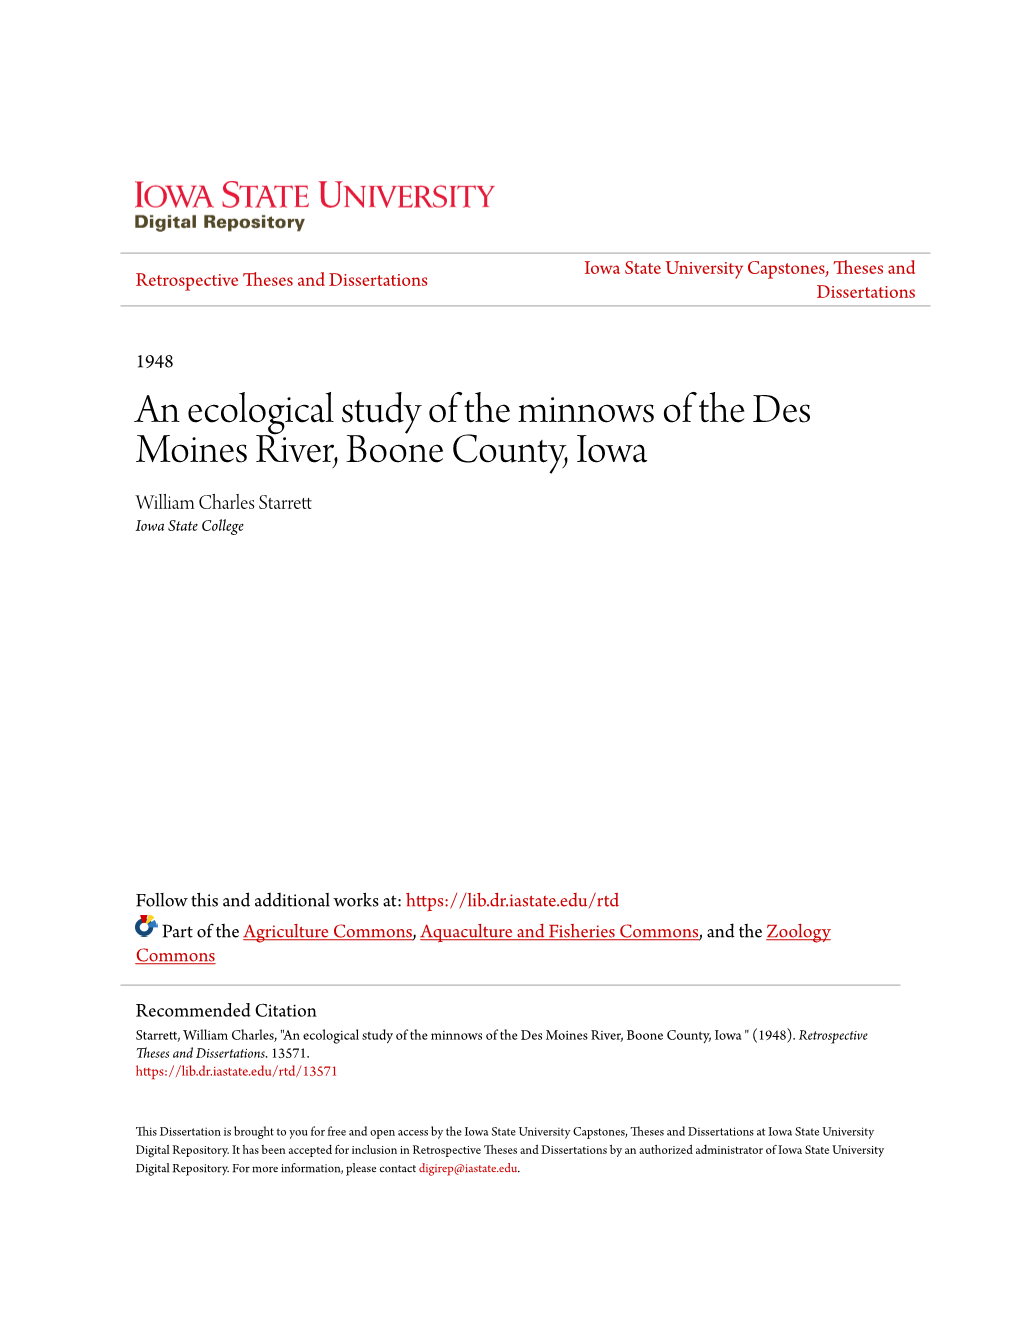 An Ecological Study of the Minnows of the Des Moines River, Boone County, Iowa William Charles Starrett Iowa State College